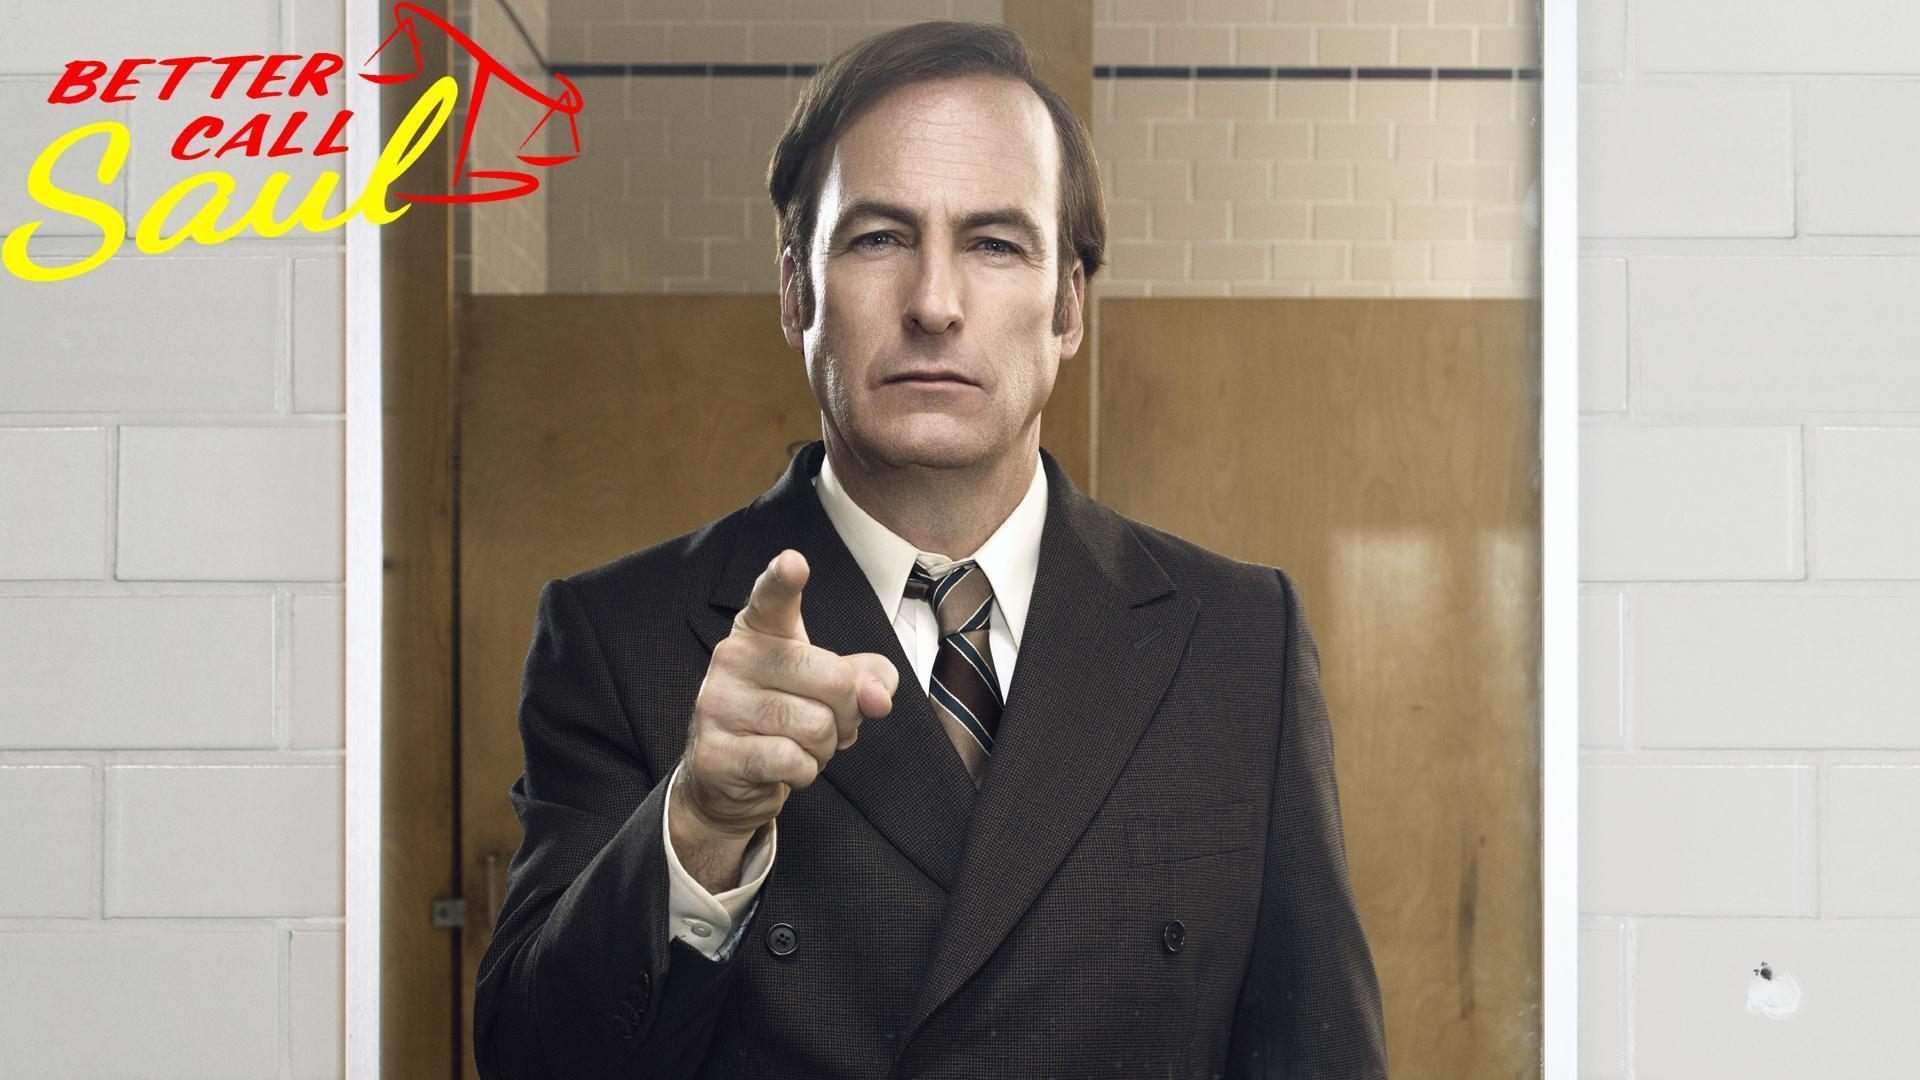 I created some better Call Saul! wallpapers : betterCallSaul